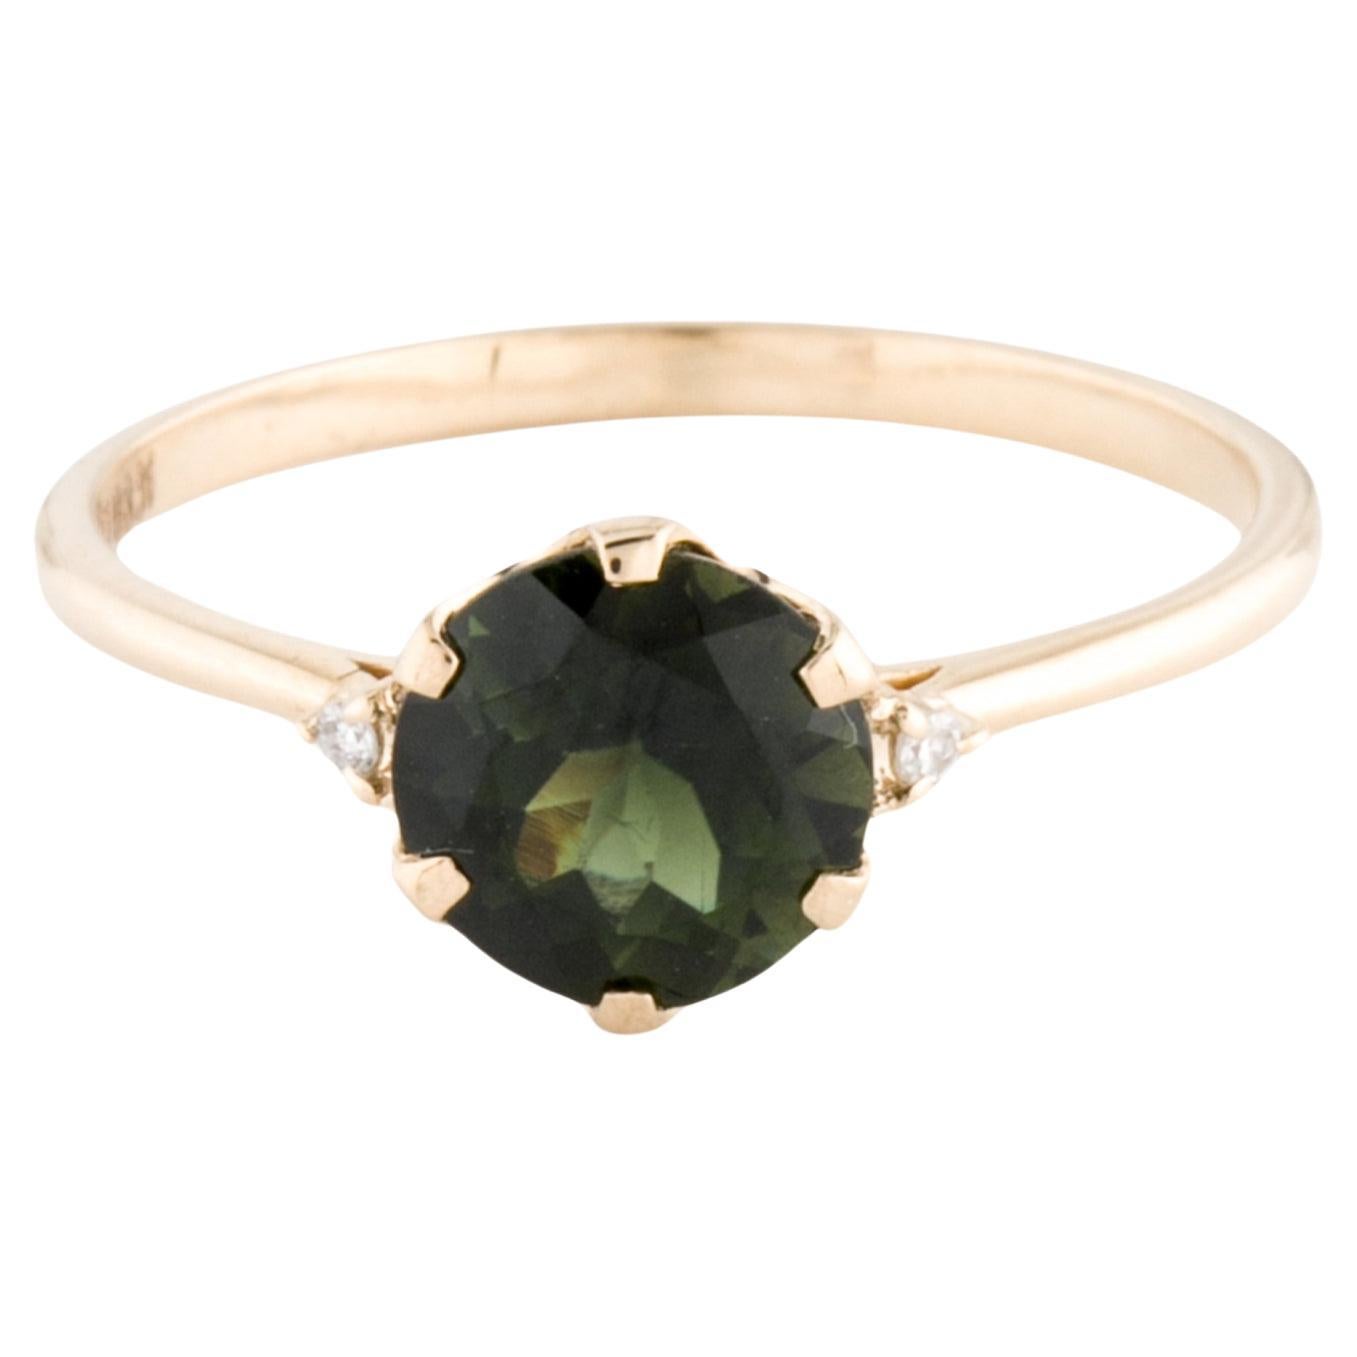 Captivating 14K Gold 1.44ctw Tourmaline & Diamond Cocktail Ring - Size 7.25 For Sale